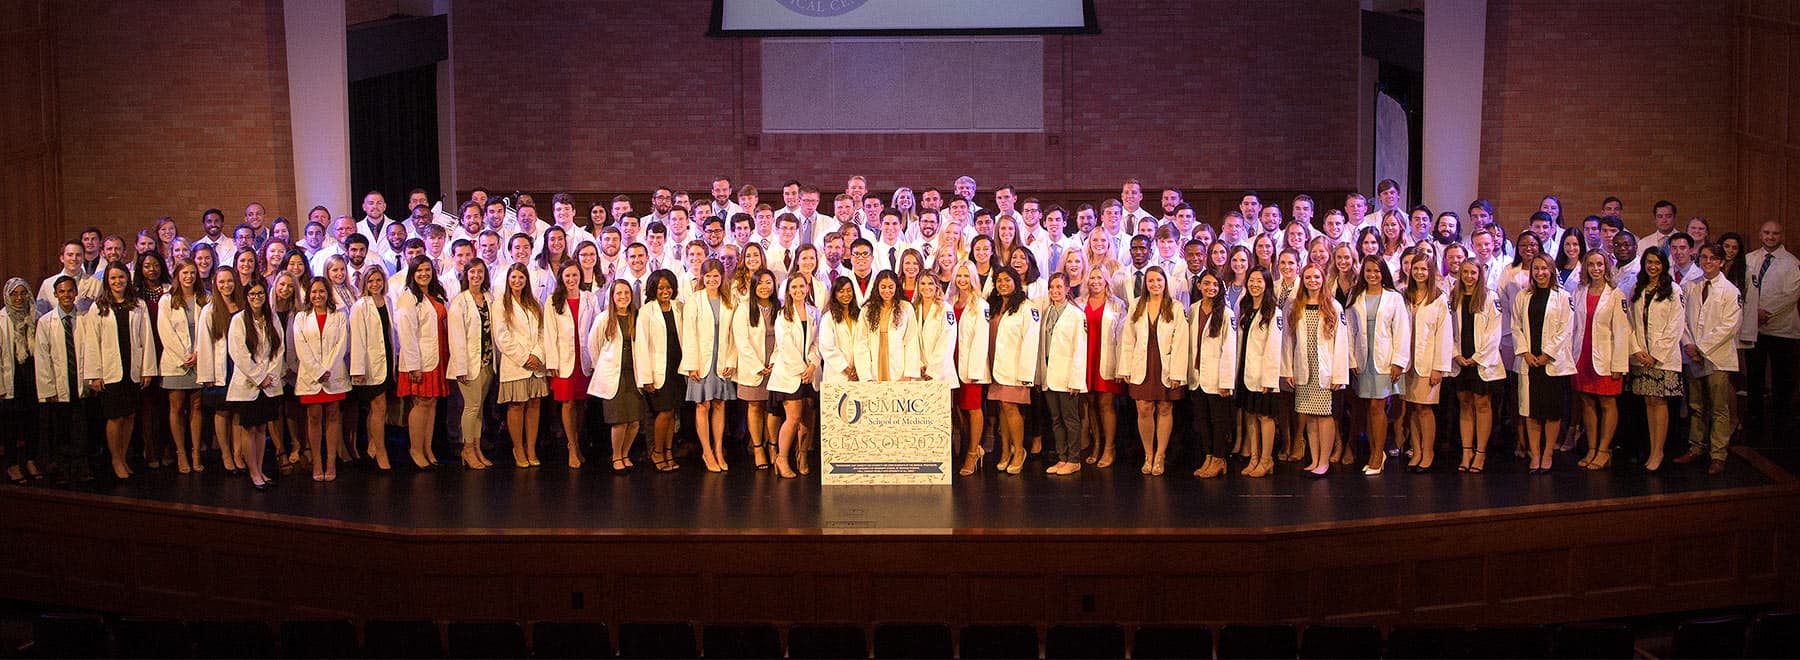 Students in the School of Medicine Class of 2022 represent 22 different college majors; 96 percent come from underserved counties and 38 percent are from rural areas.